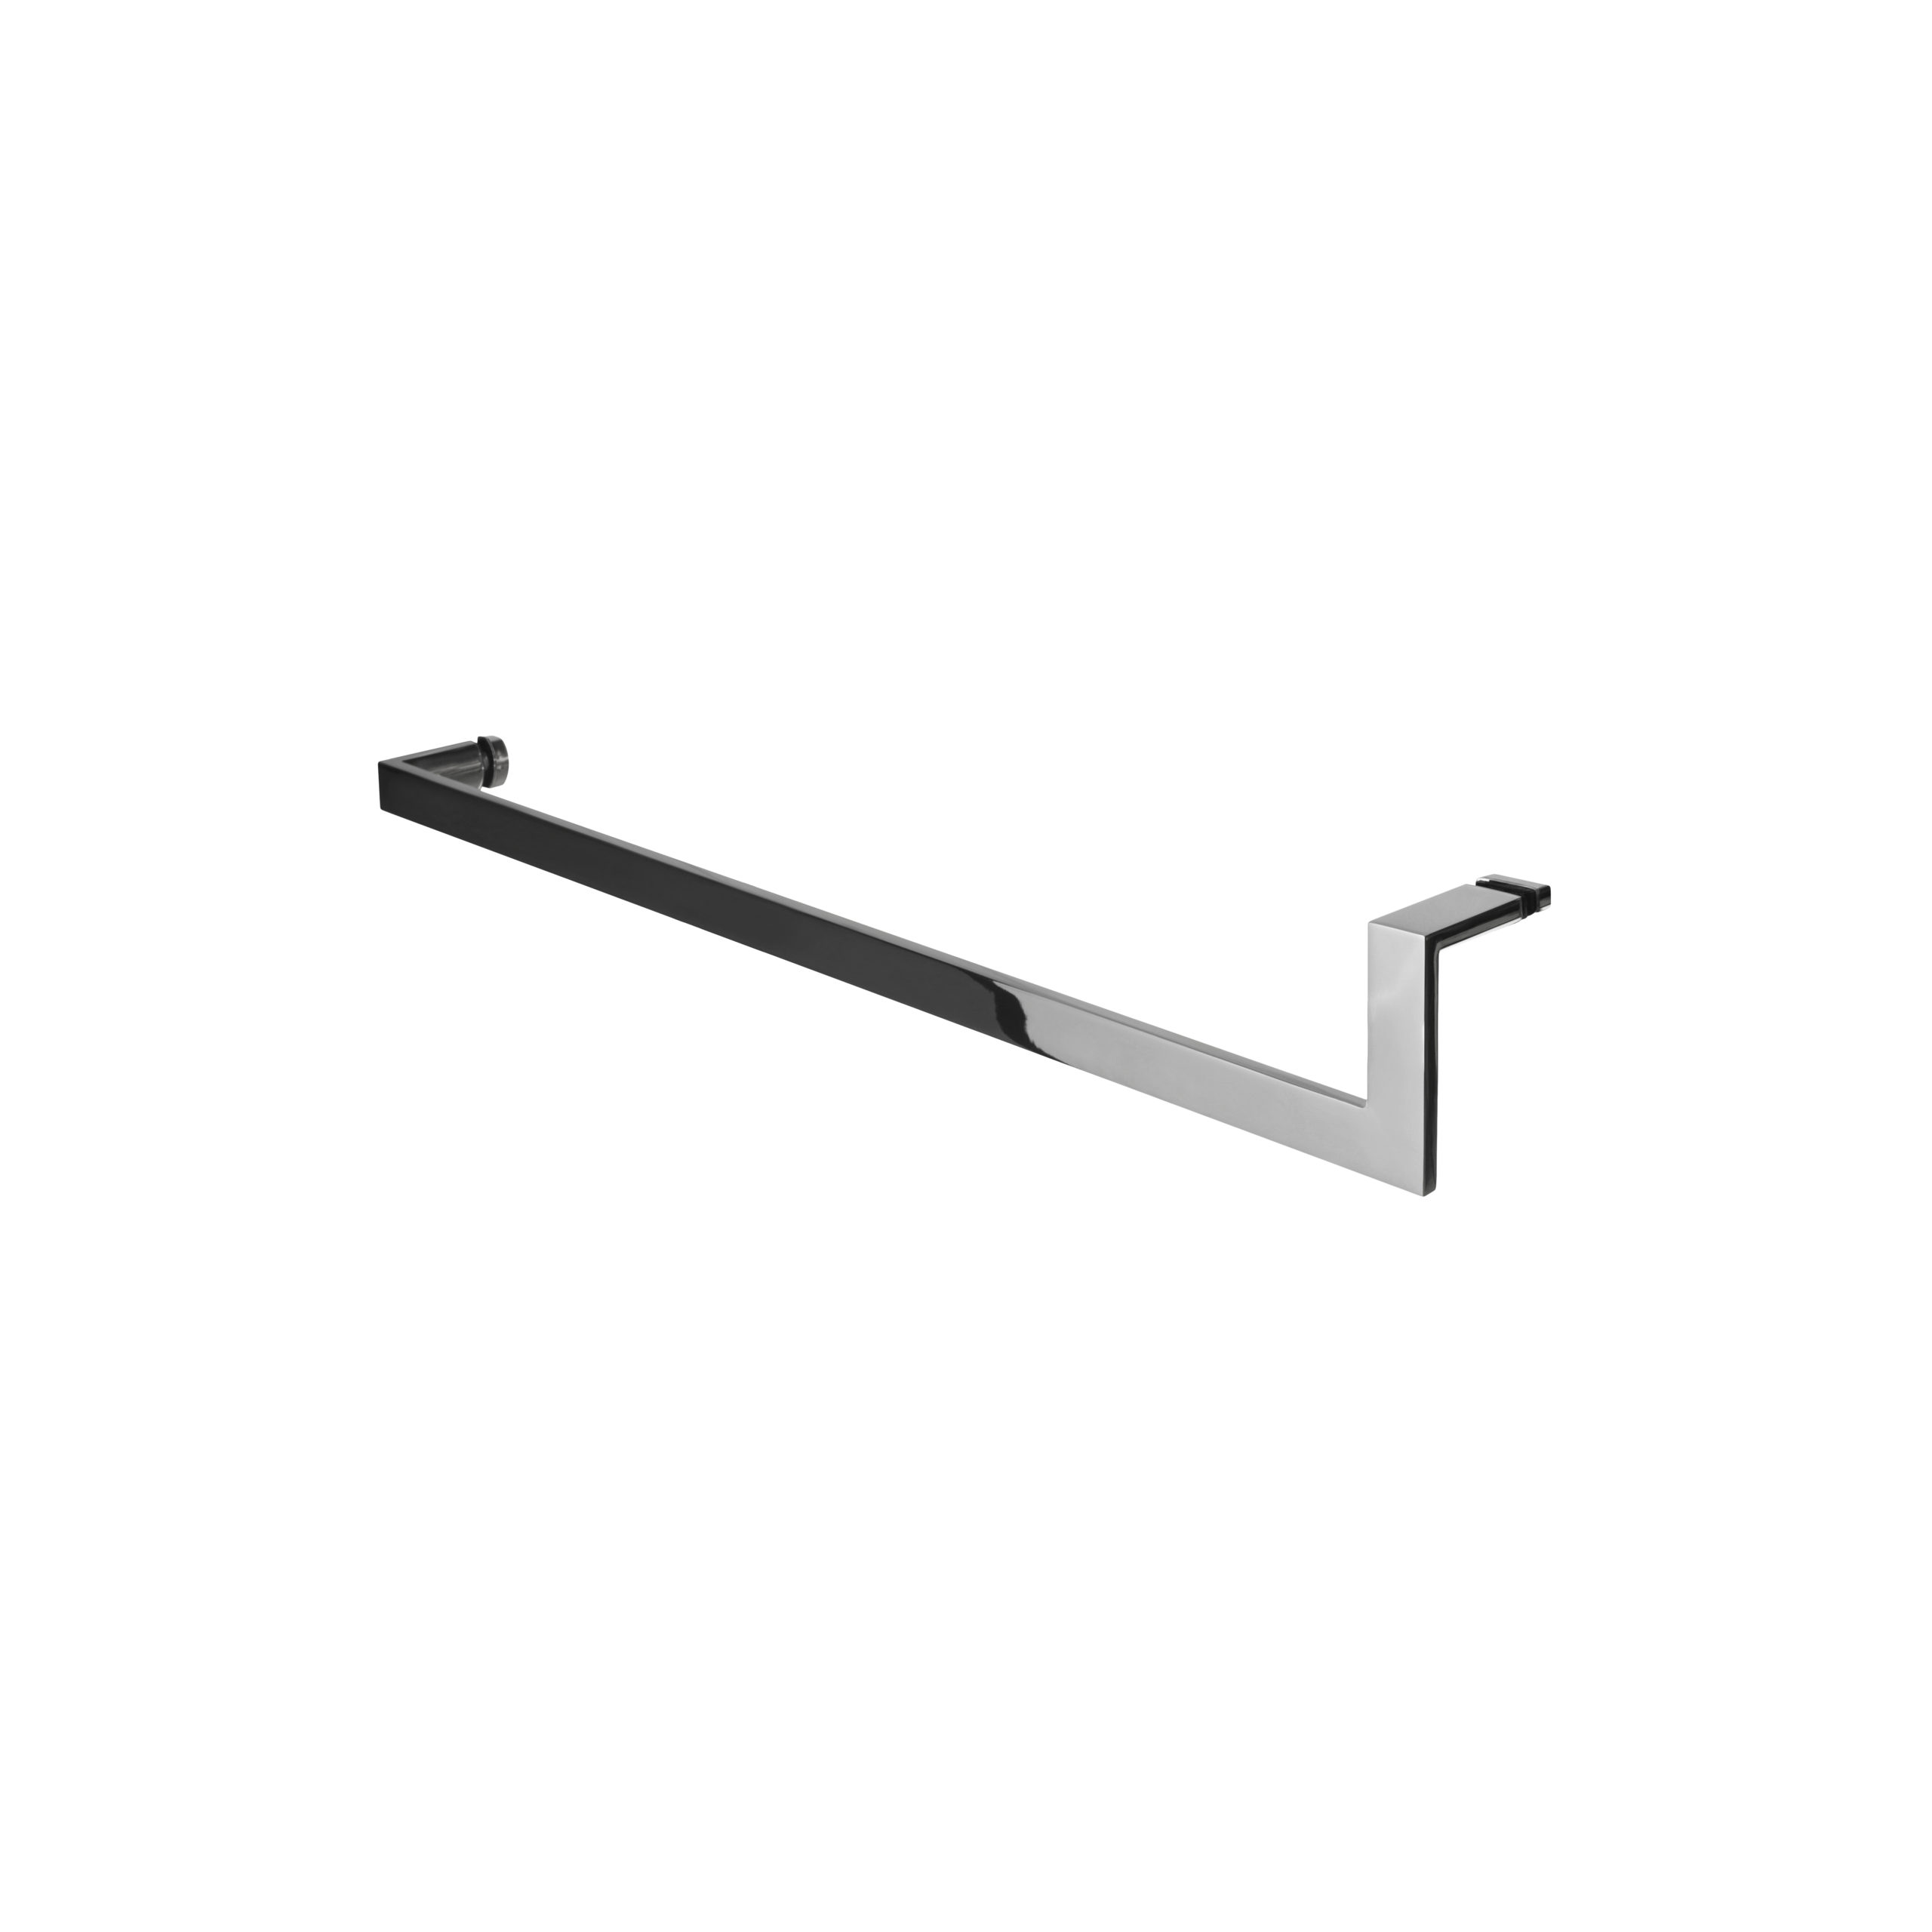 Polished stainless steel modern door handle - towel bar - product featured image - 24 inch length - product SKU LP 402-2 PSS